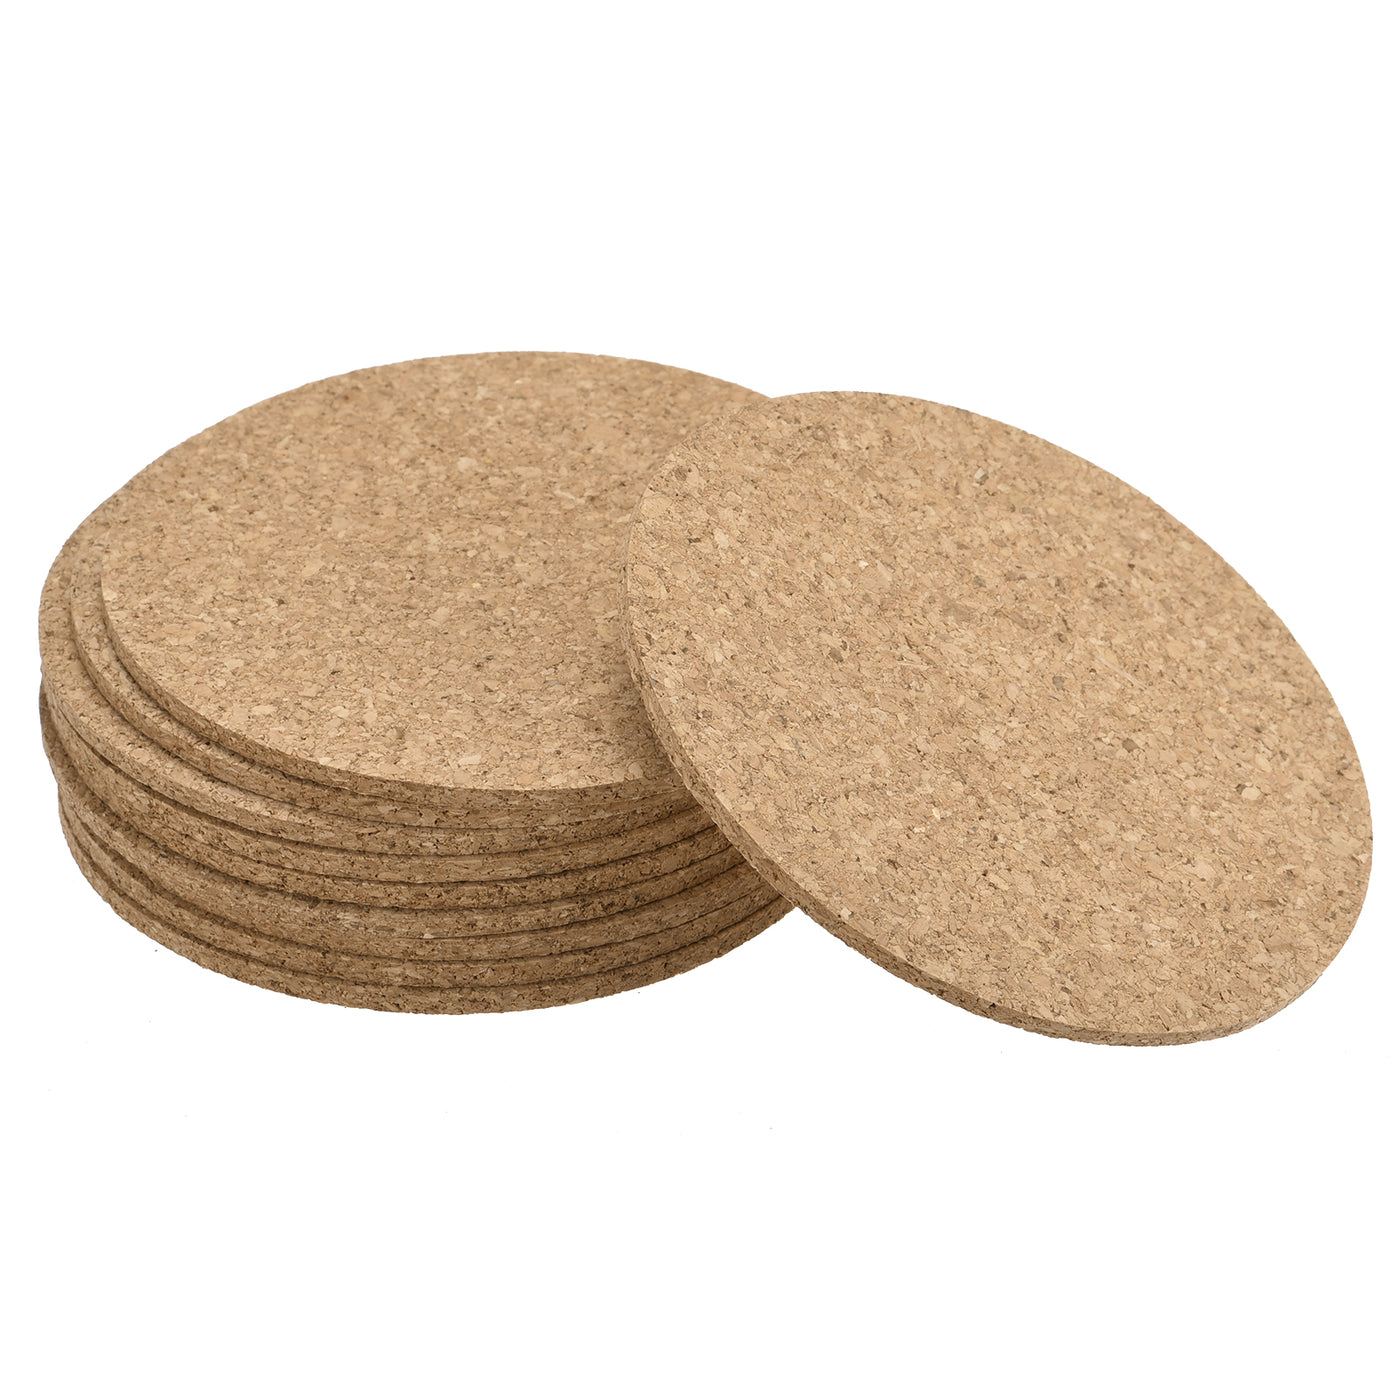 uxcell Uxcell 95mm(3.74") Round Coasters 3mm Thick Cork Cup Mat Pad for Tableware 10pcs